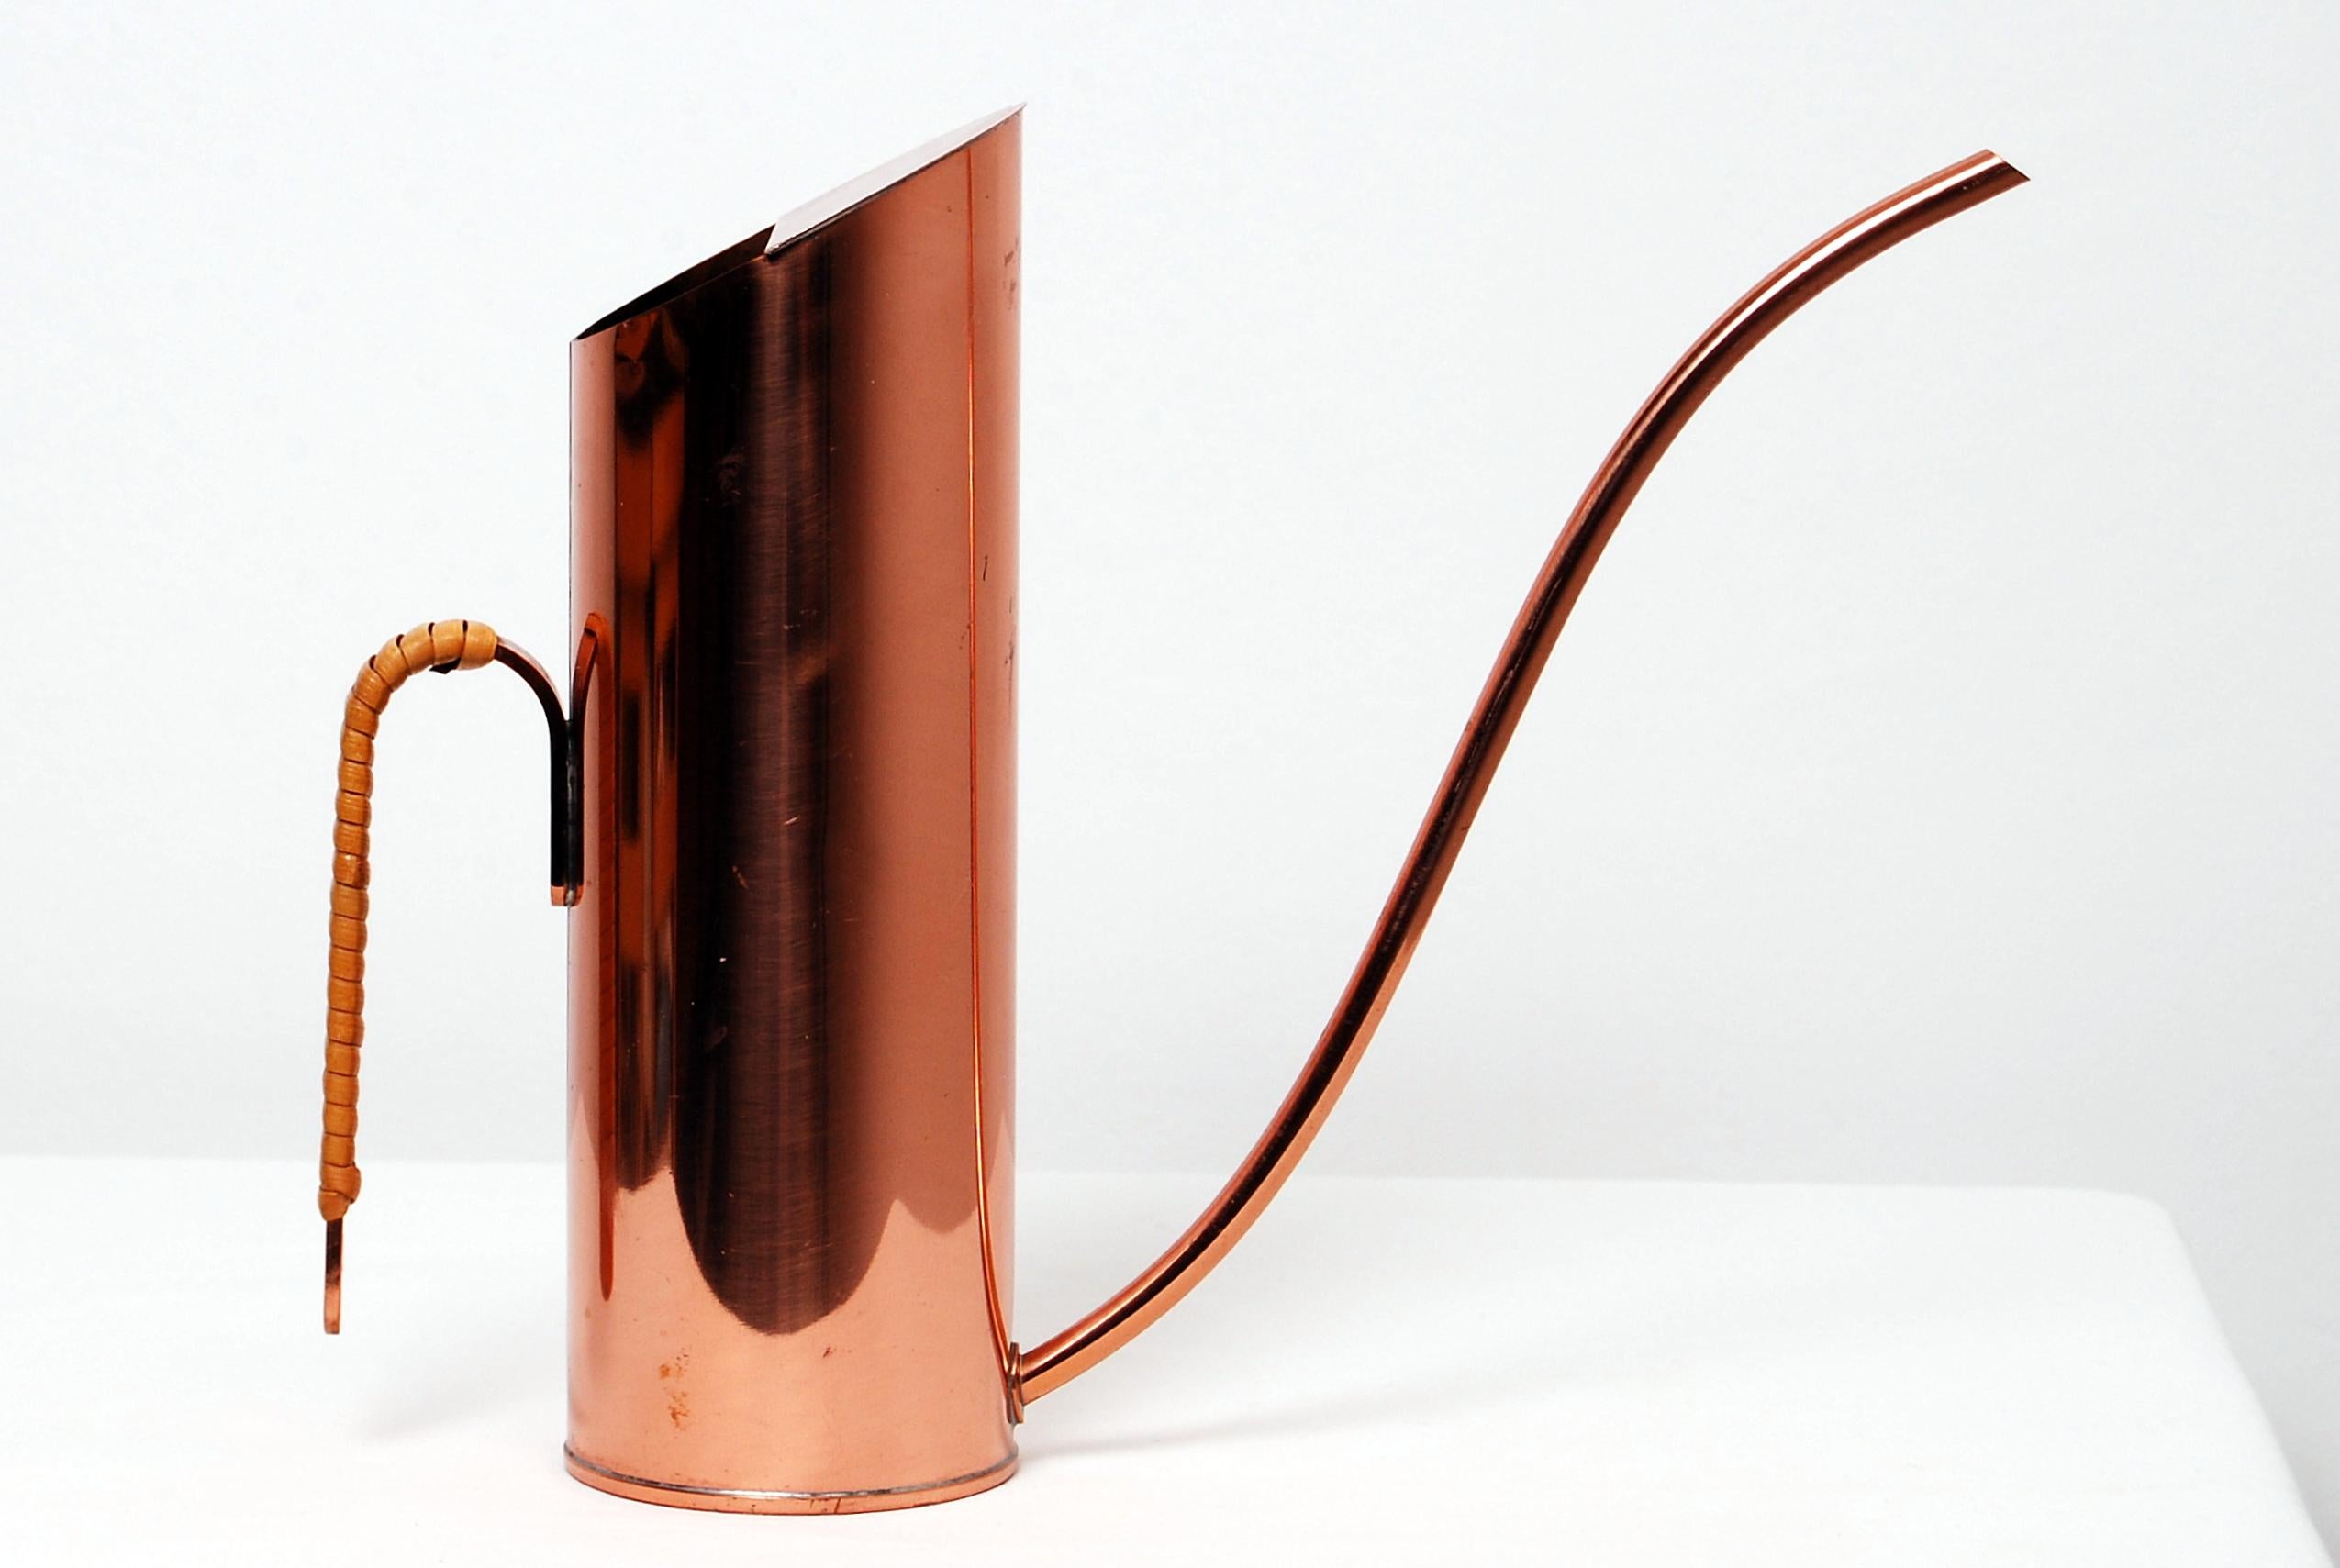 Vintage copper watering pitcher / can with woven rattan handle by Gunnar Ander for Ystad Metall, Sweden.